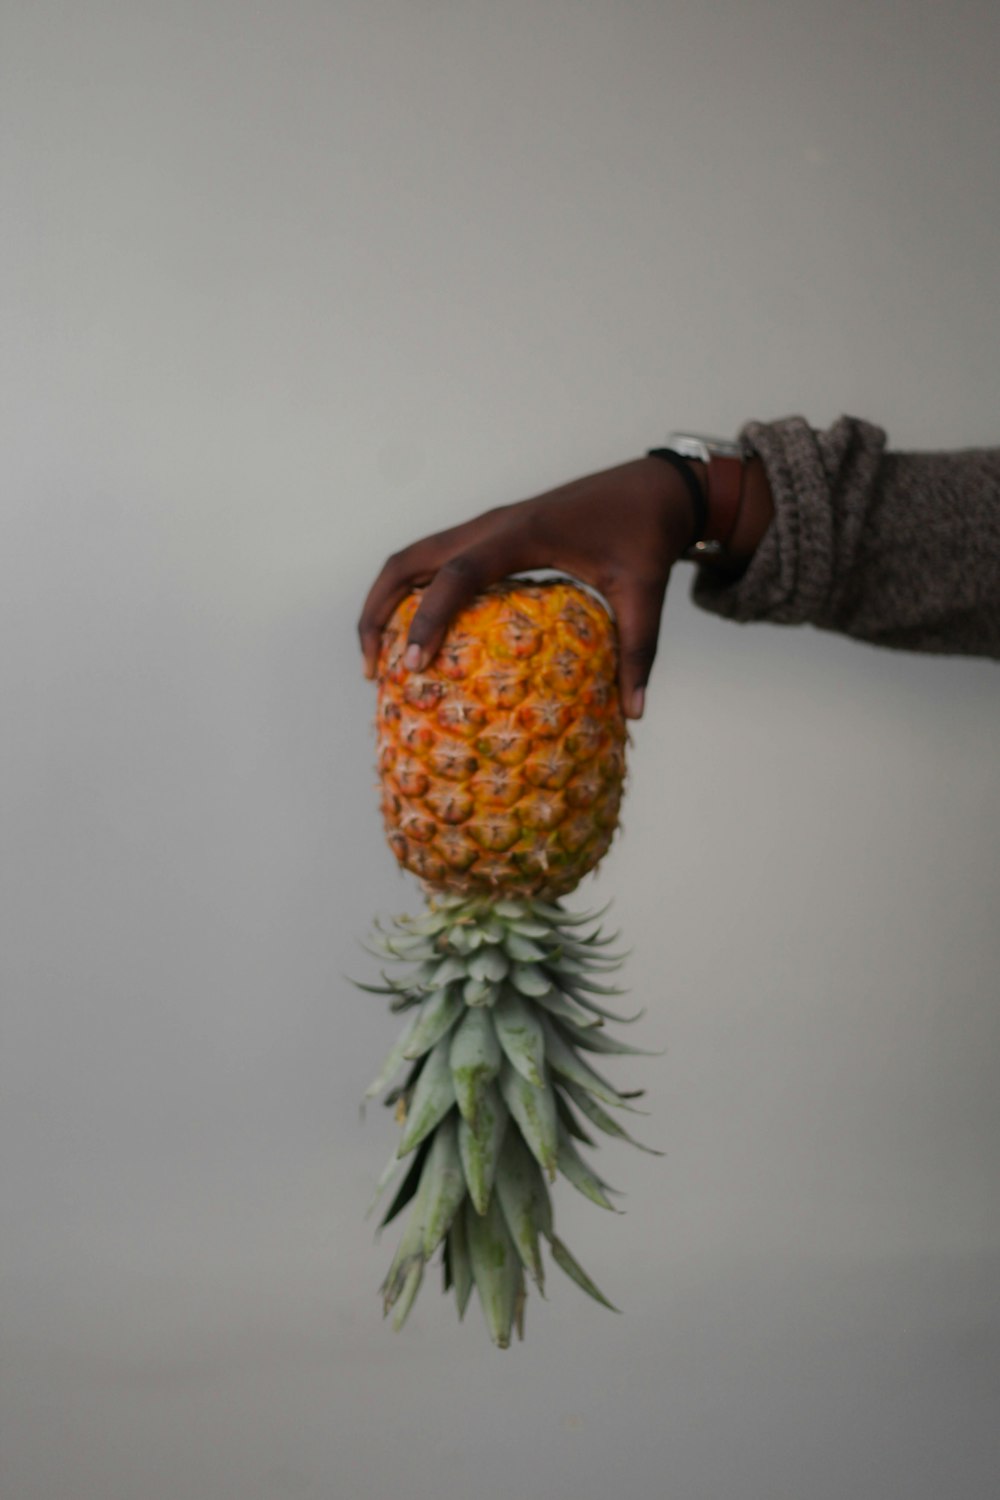 person holding pineapple downwards